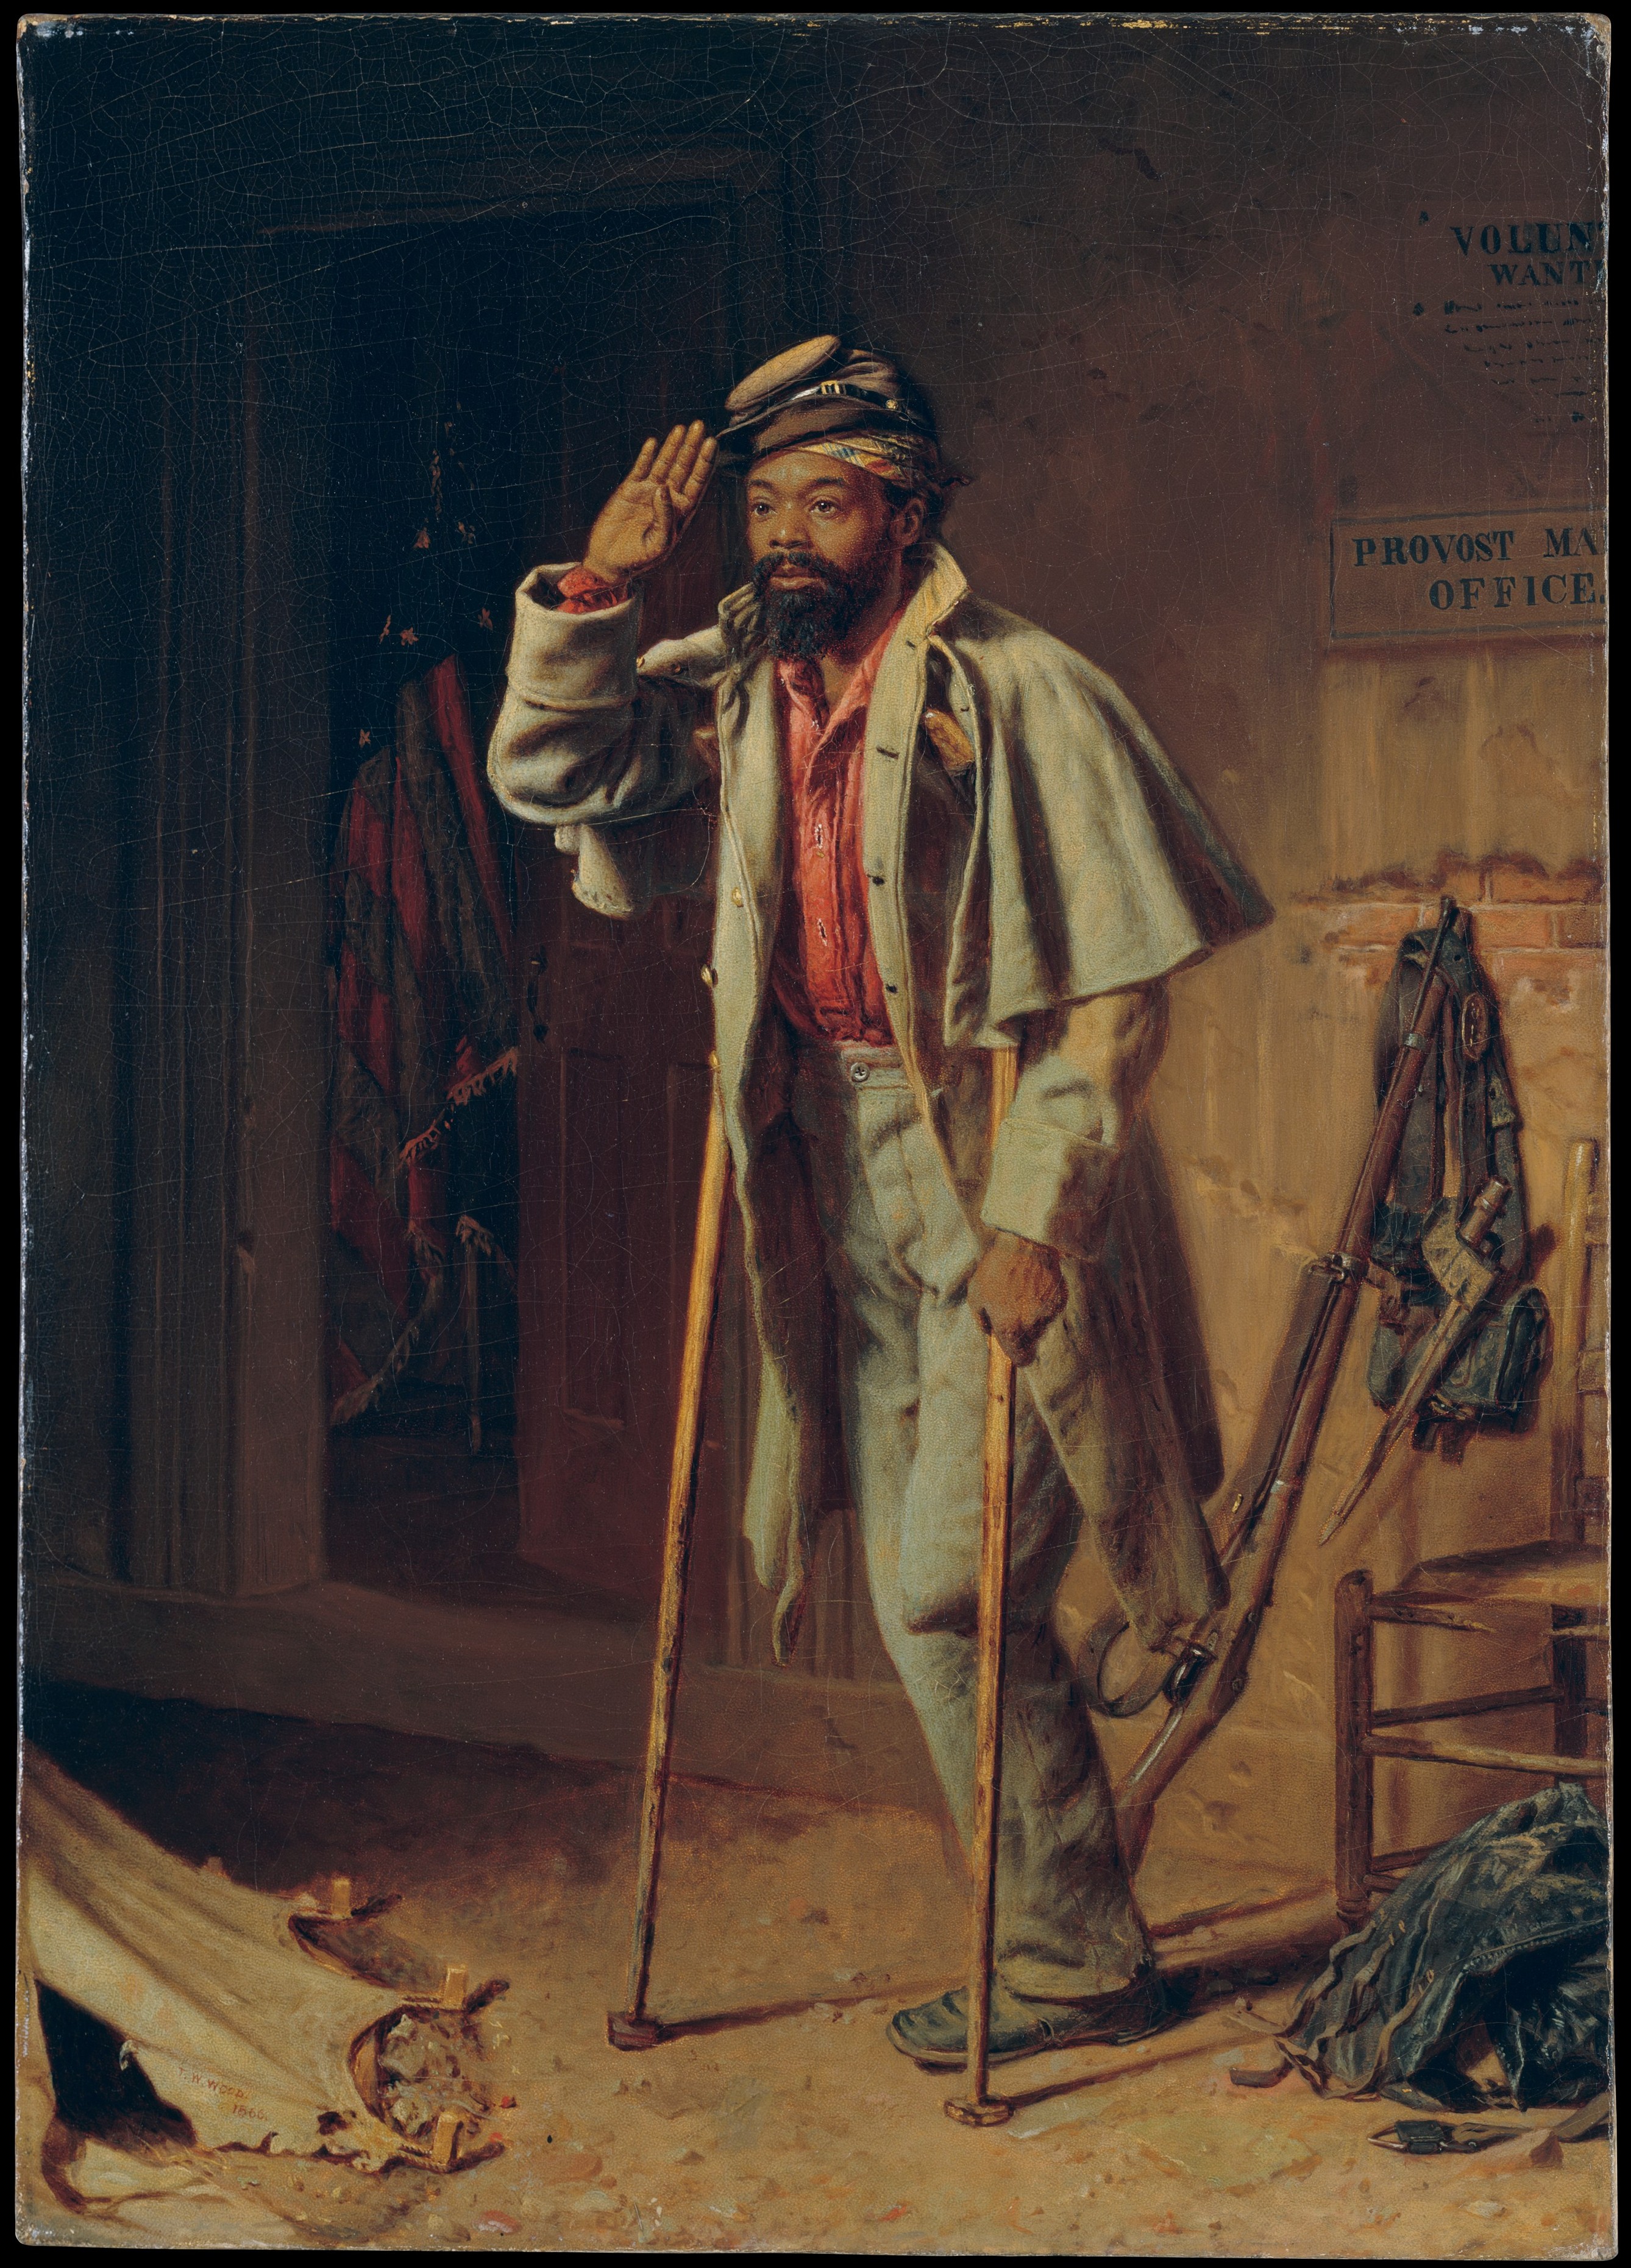 Painting of Black man standing with crutches, wearing faded Civil War uniform, hand raised in salute, with one leg amputated at the knee.